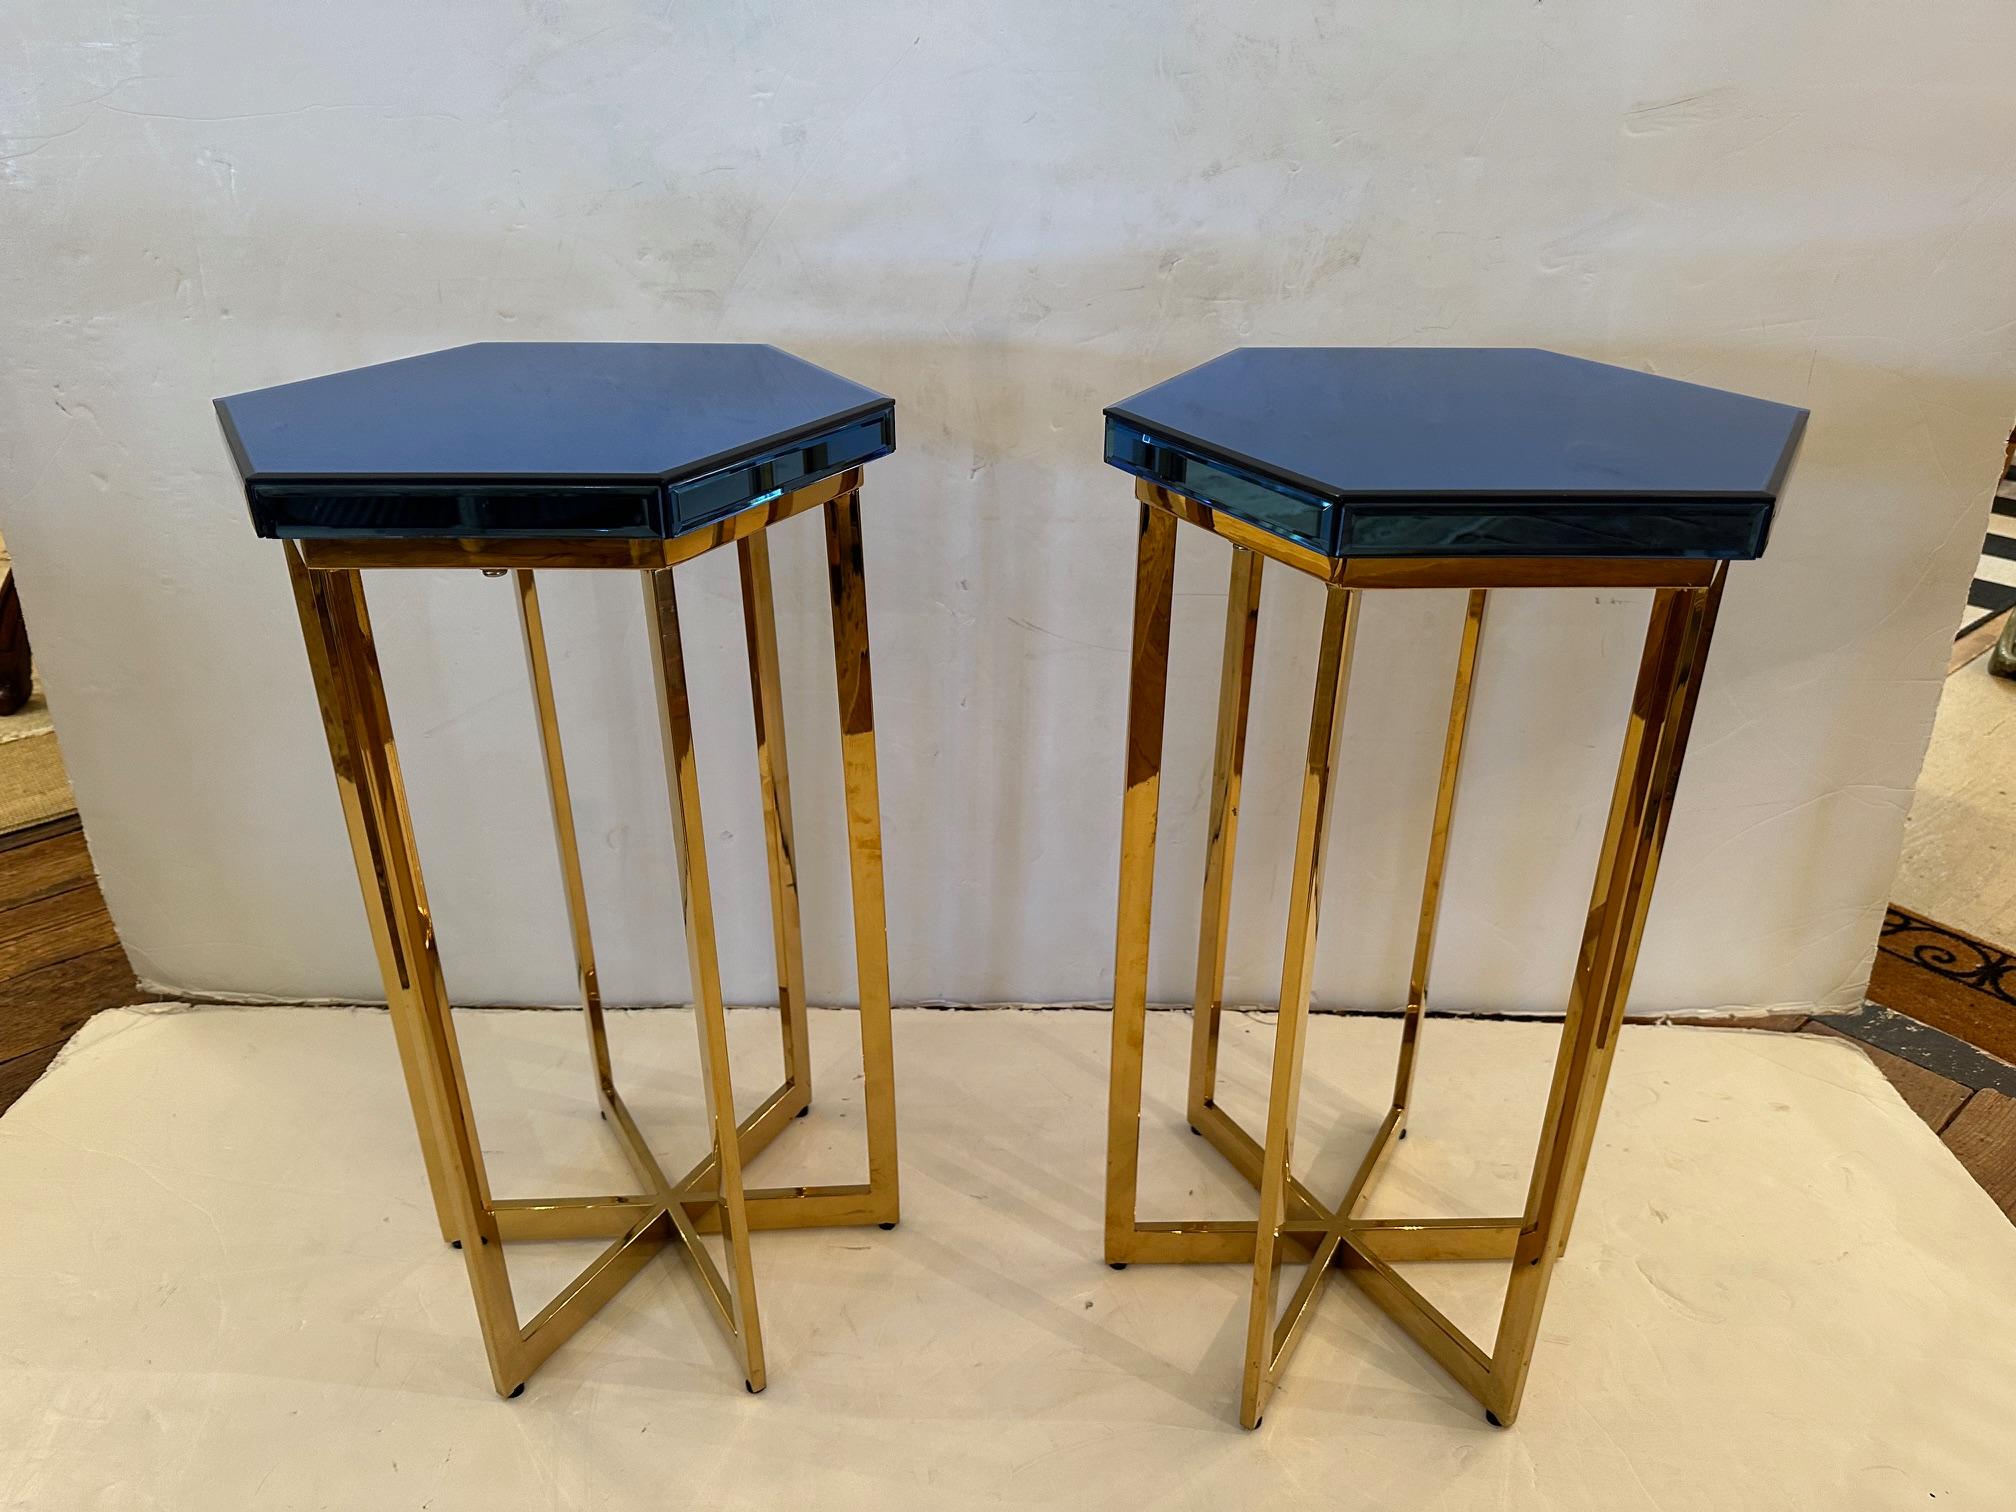 Glamorous pair of 6 sided blue bevelled mirrored end tables having shiny brass bases.